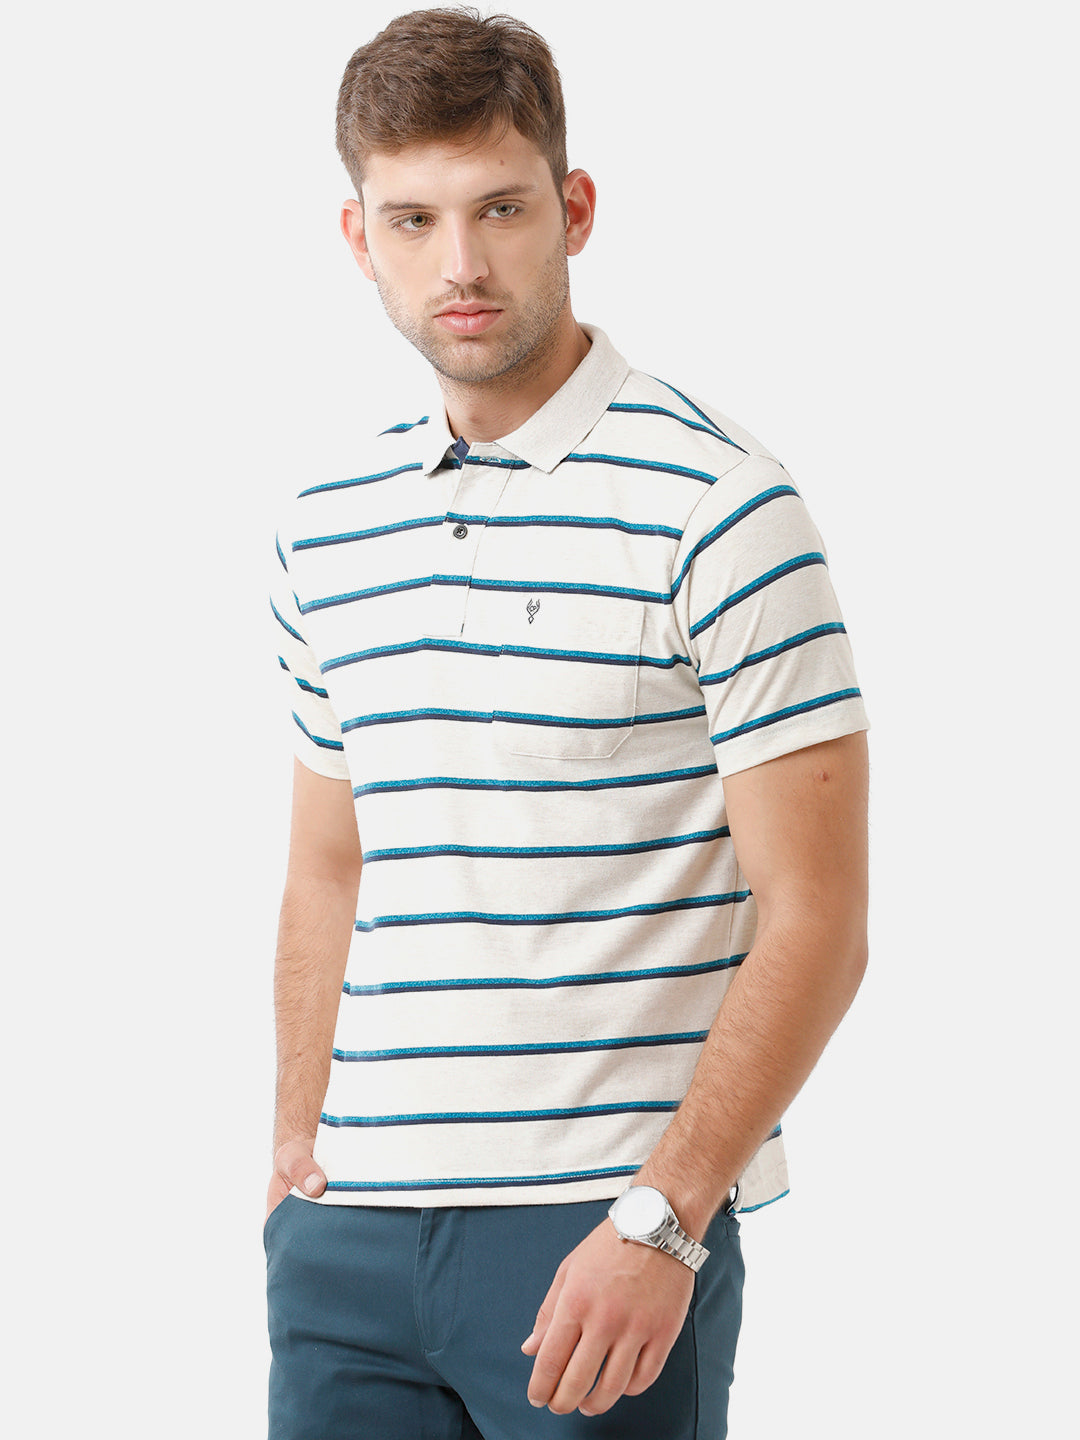 Classic Polo Mens Cotton Striped Half Sleeve Authentic Fit Polo Neck White Color T-Shirt | M.Flash 16